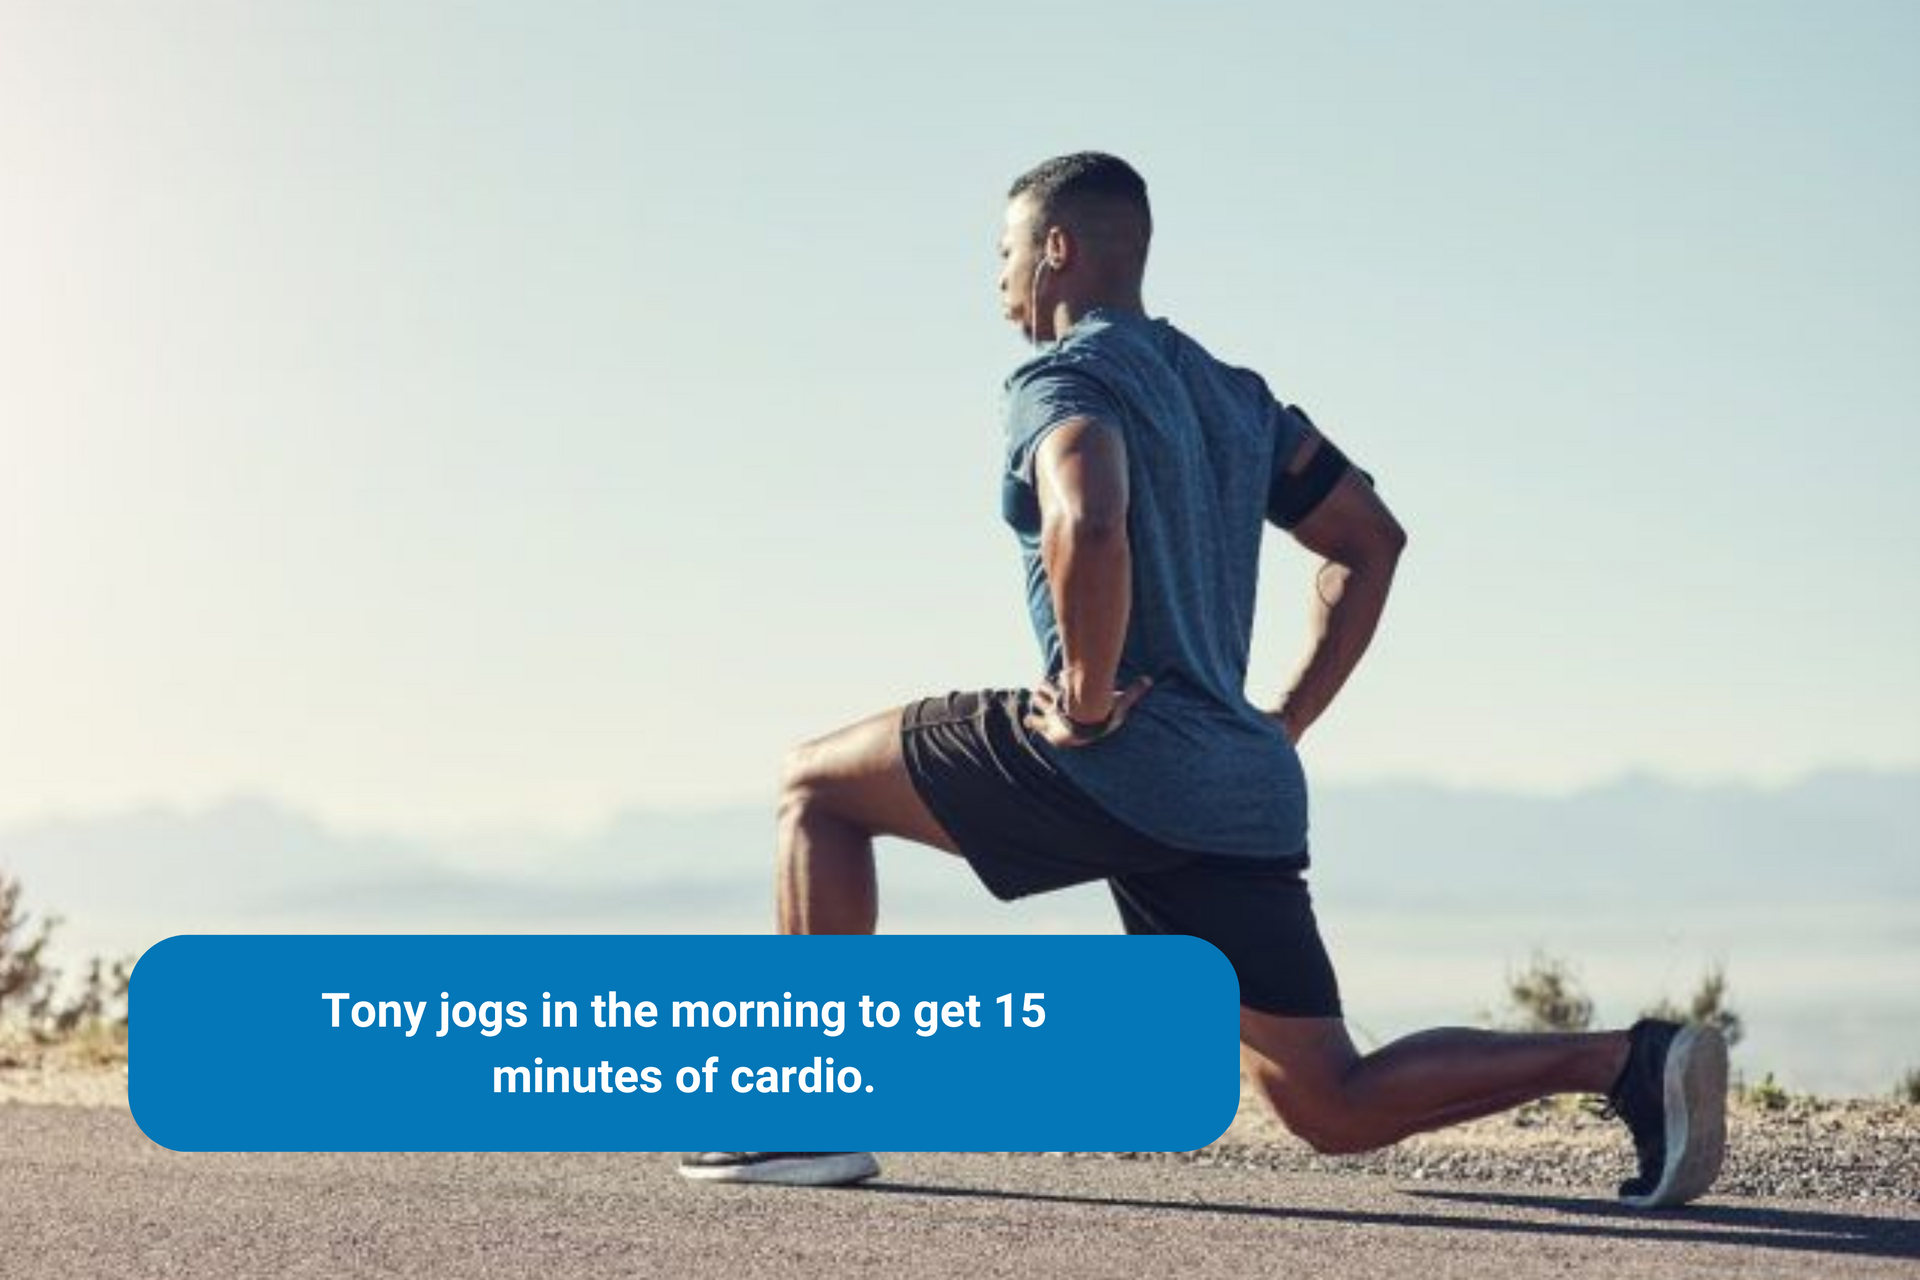 Tony jogs 15 minutes every morning to get cardiovascular exercise 